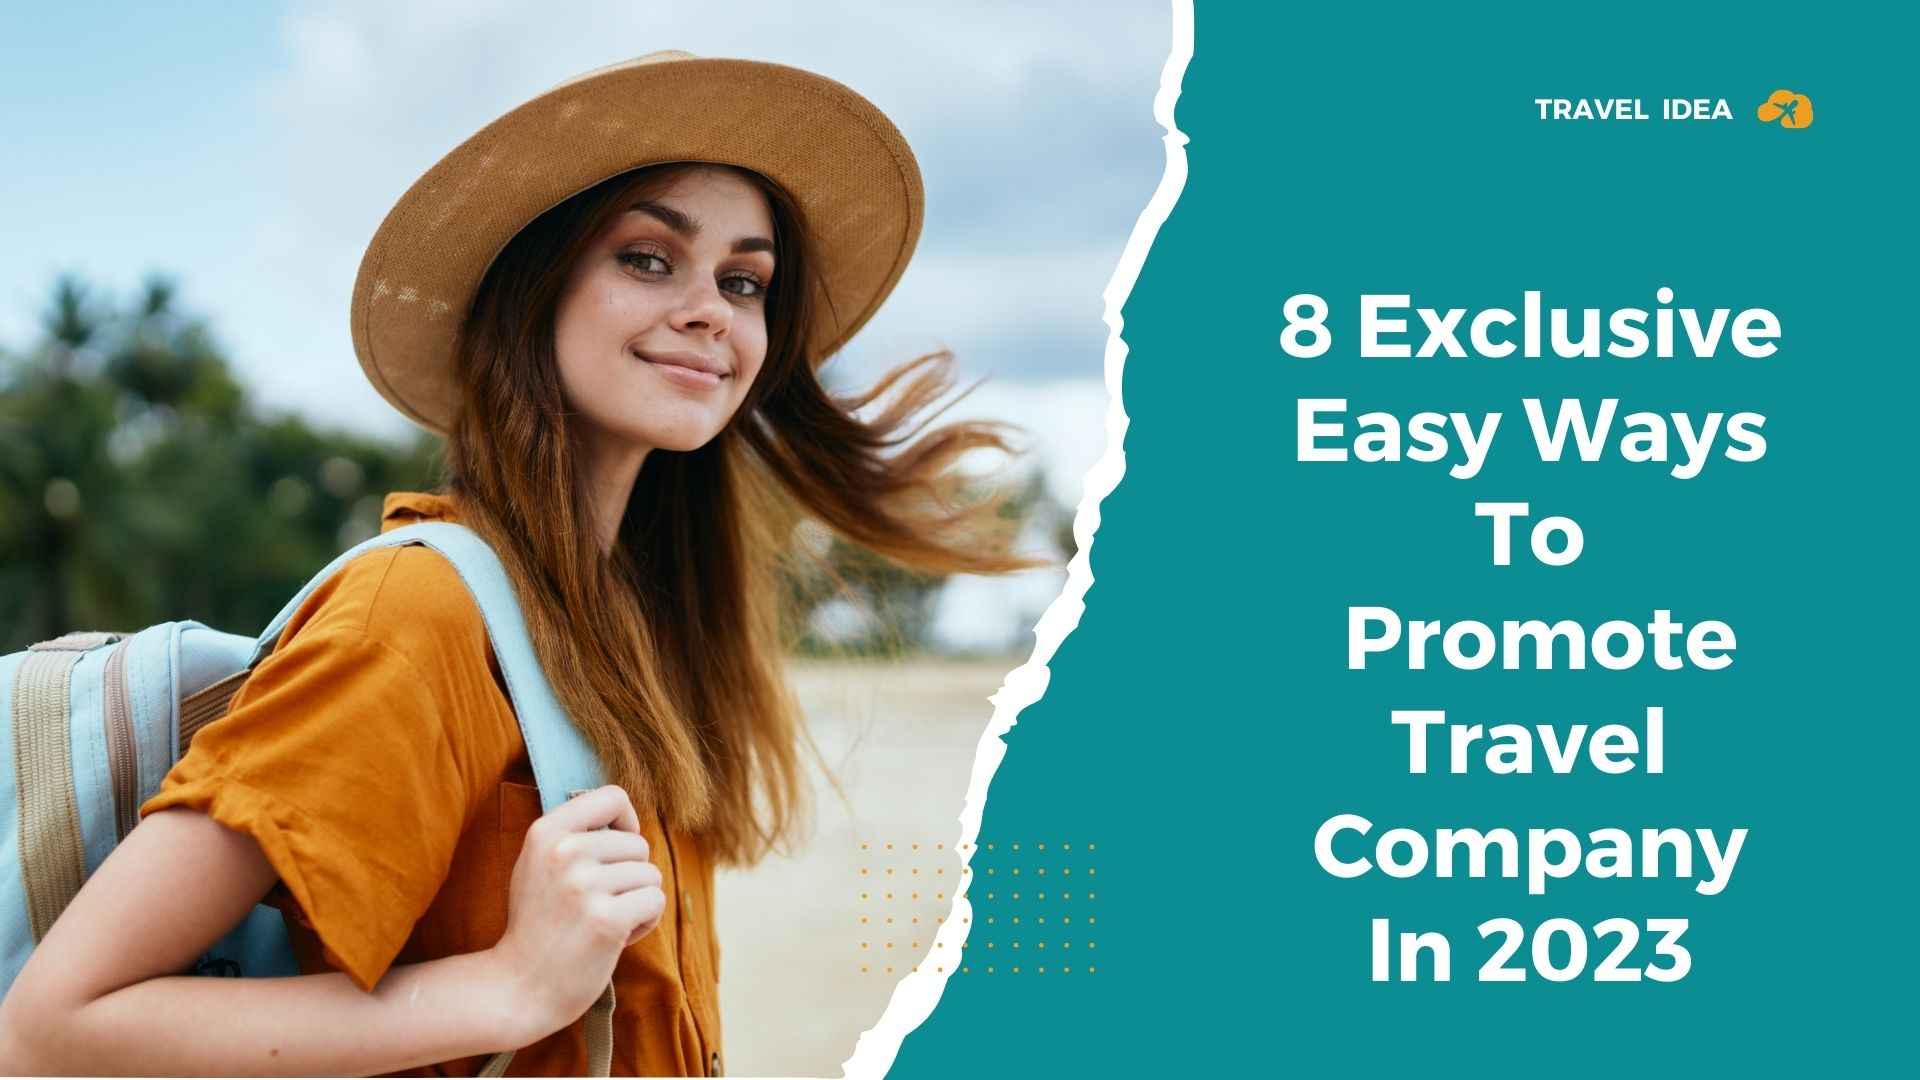 8 exclusive easy ways to promote travel company in 2023